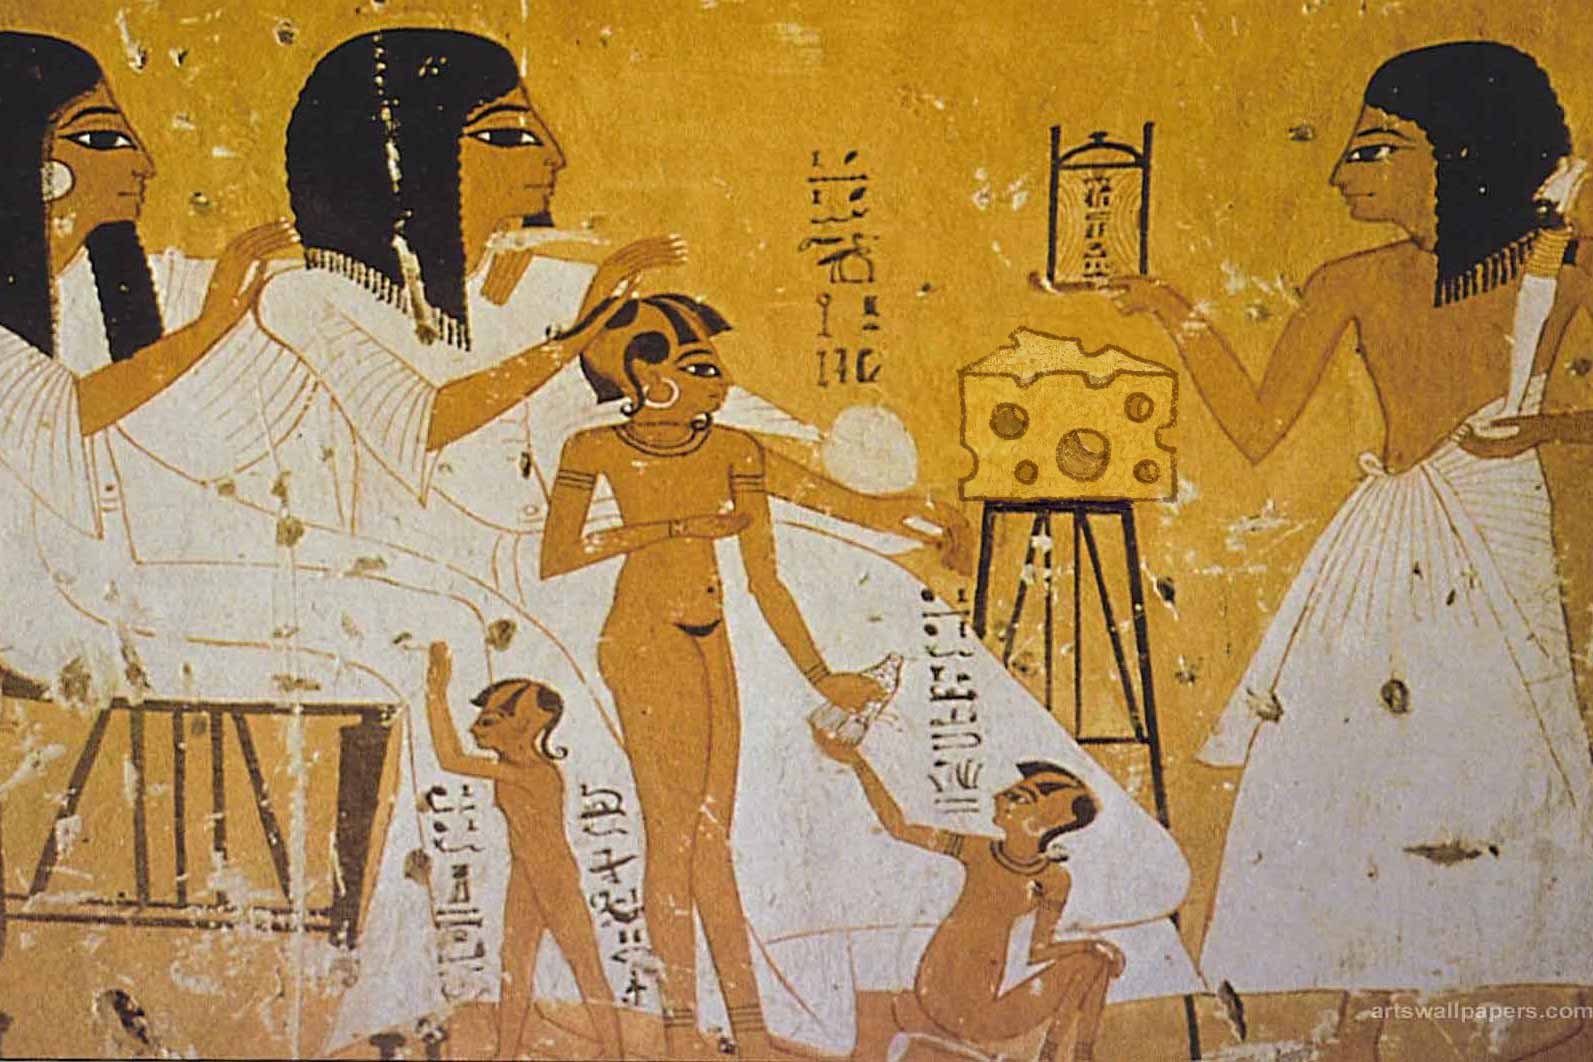 Artist’s depiction of how great it must have been to eat this tomb cheese when it was fresh.